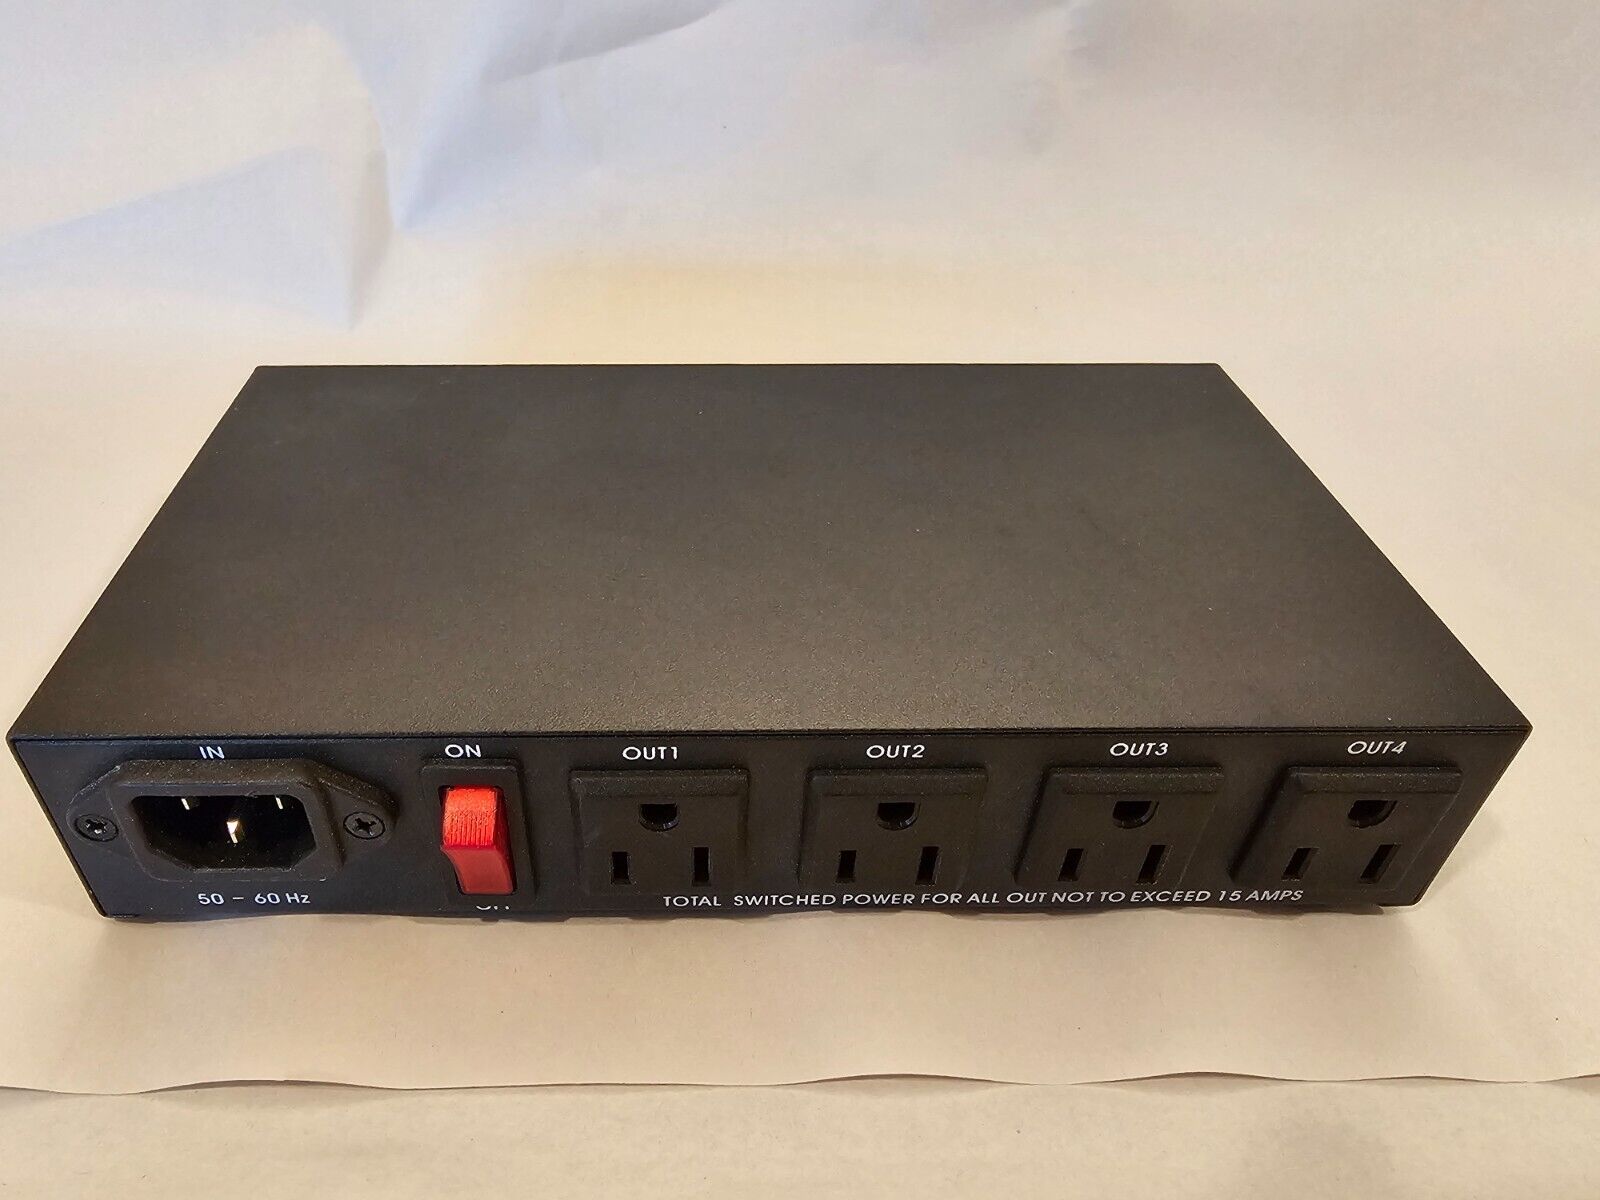 IP Power 9258 4 Port Built-In Web AC Power Network Switch Controller